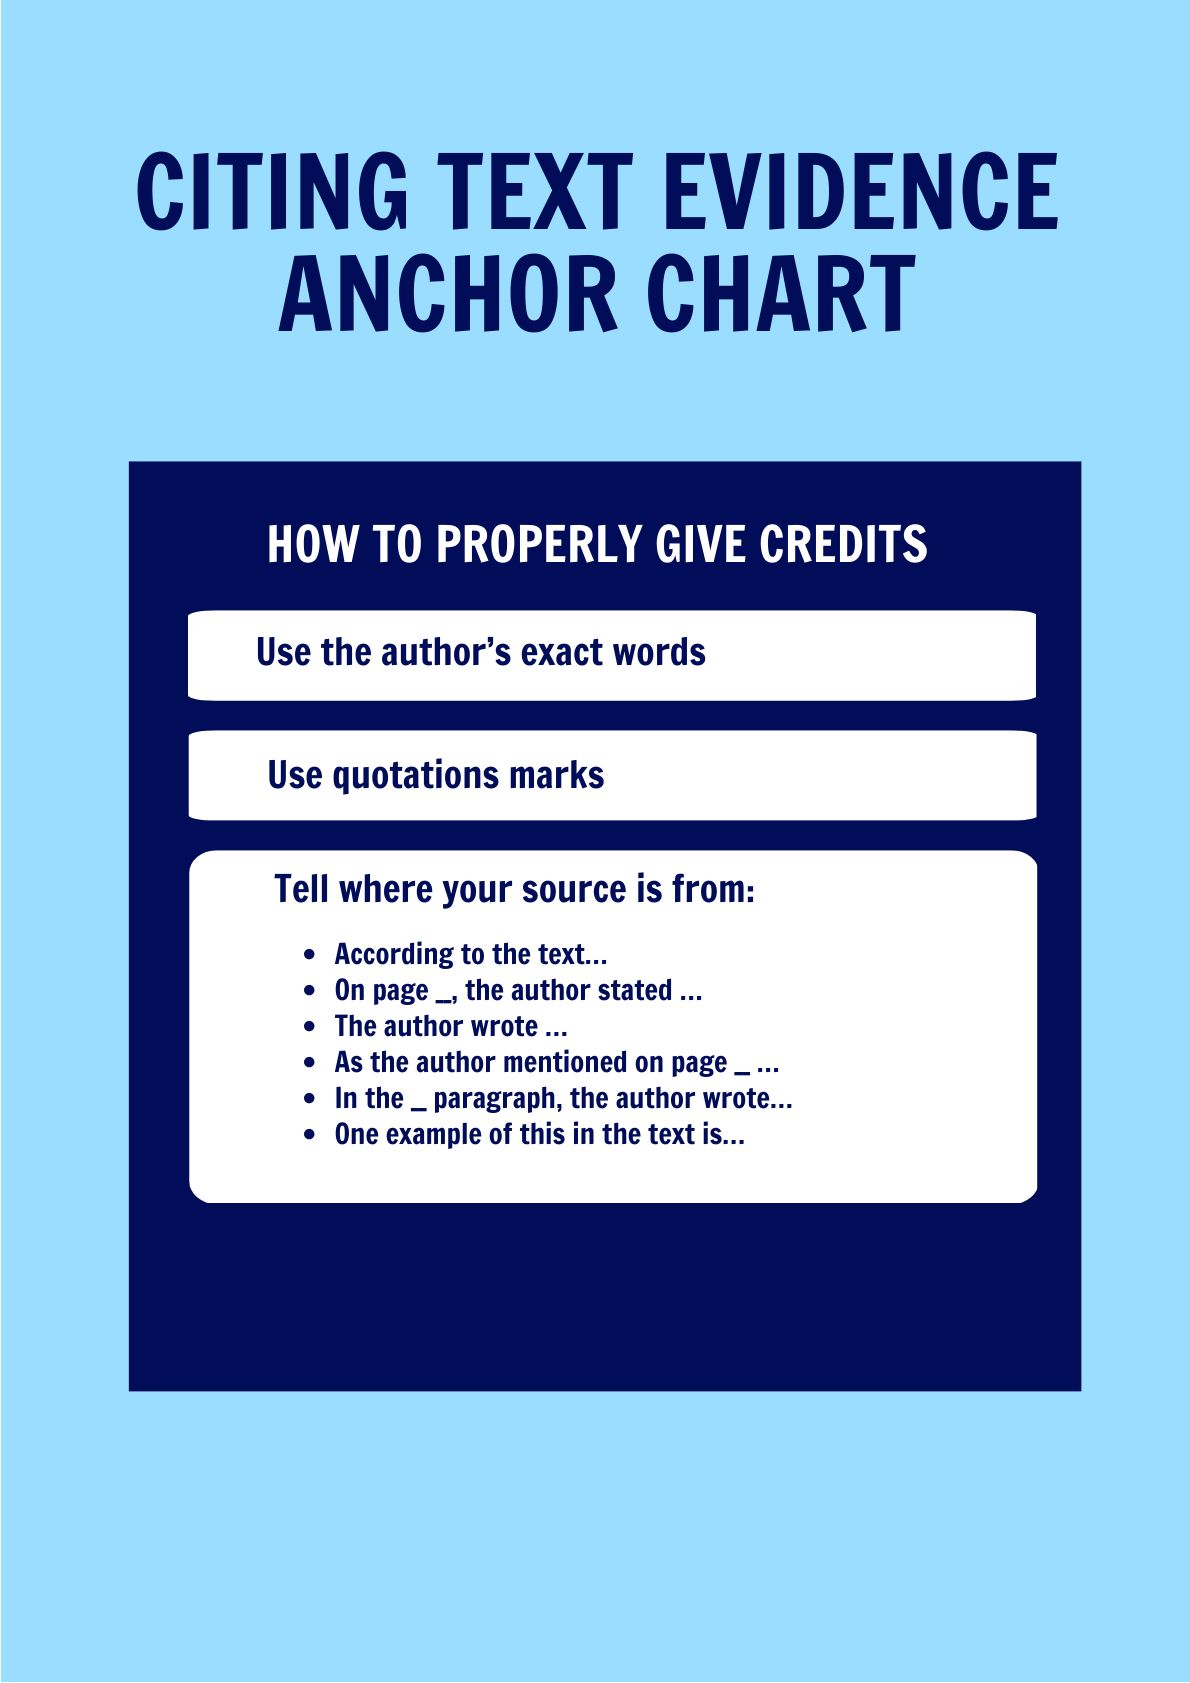 Citing Text Evidence Anchor Chart in PDF, Illustrator